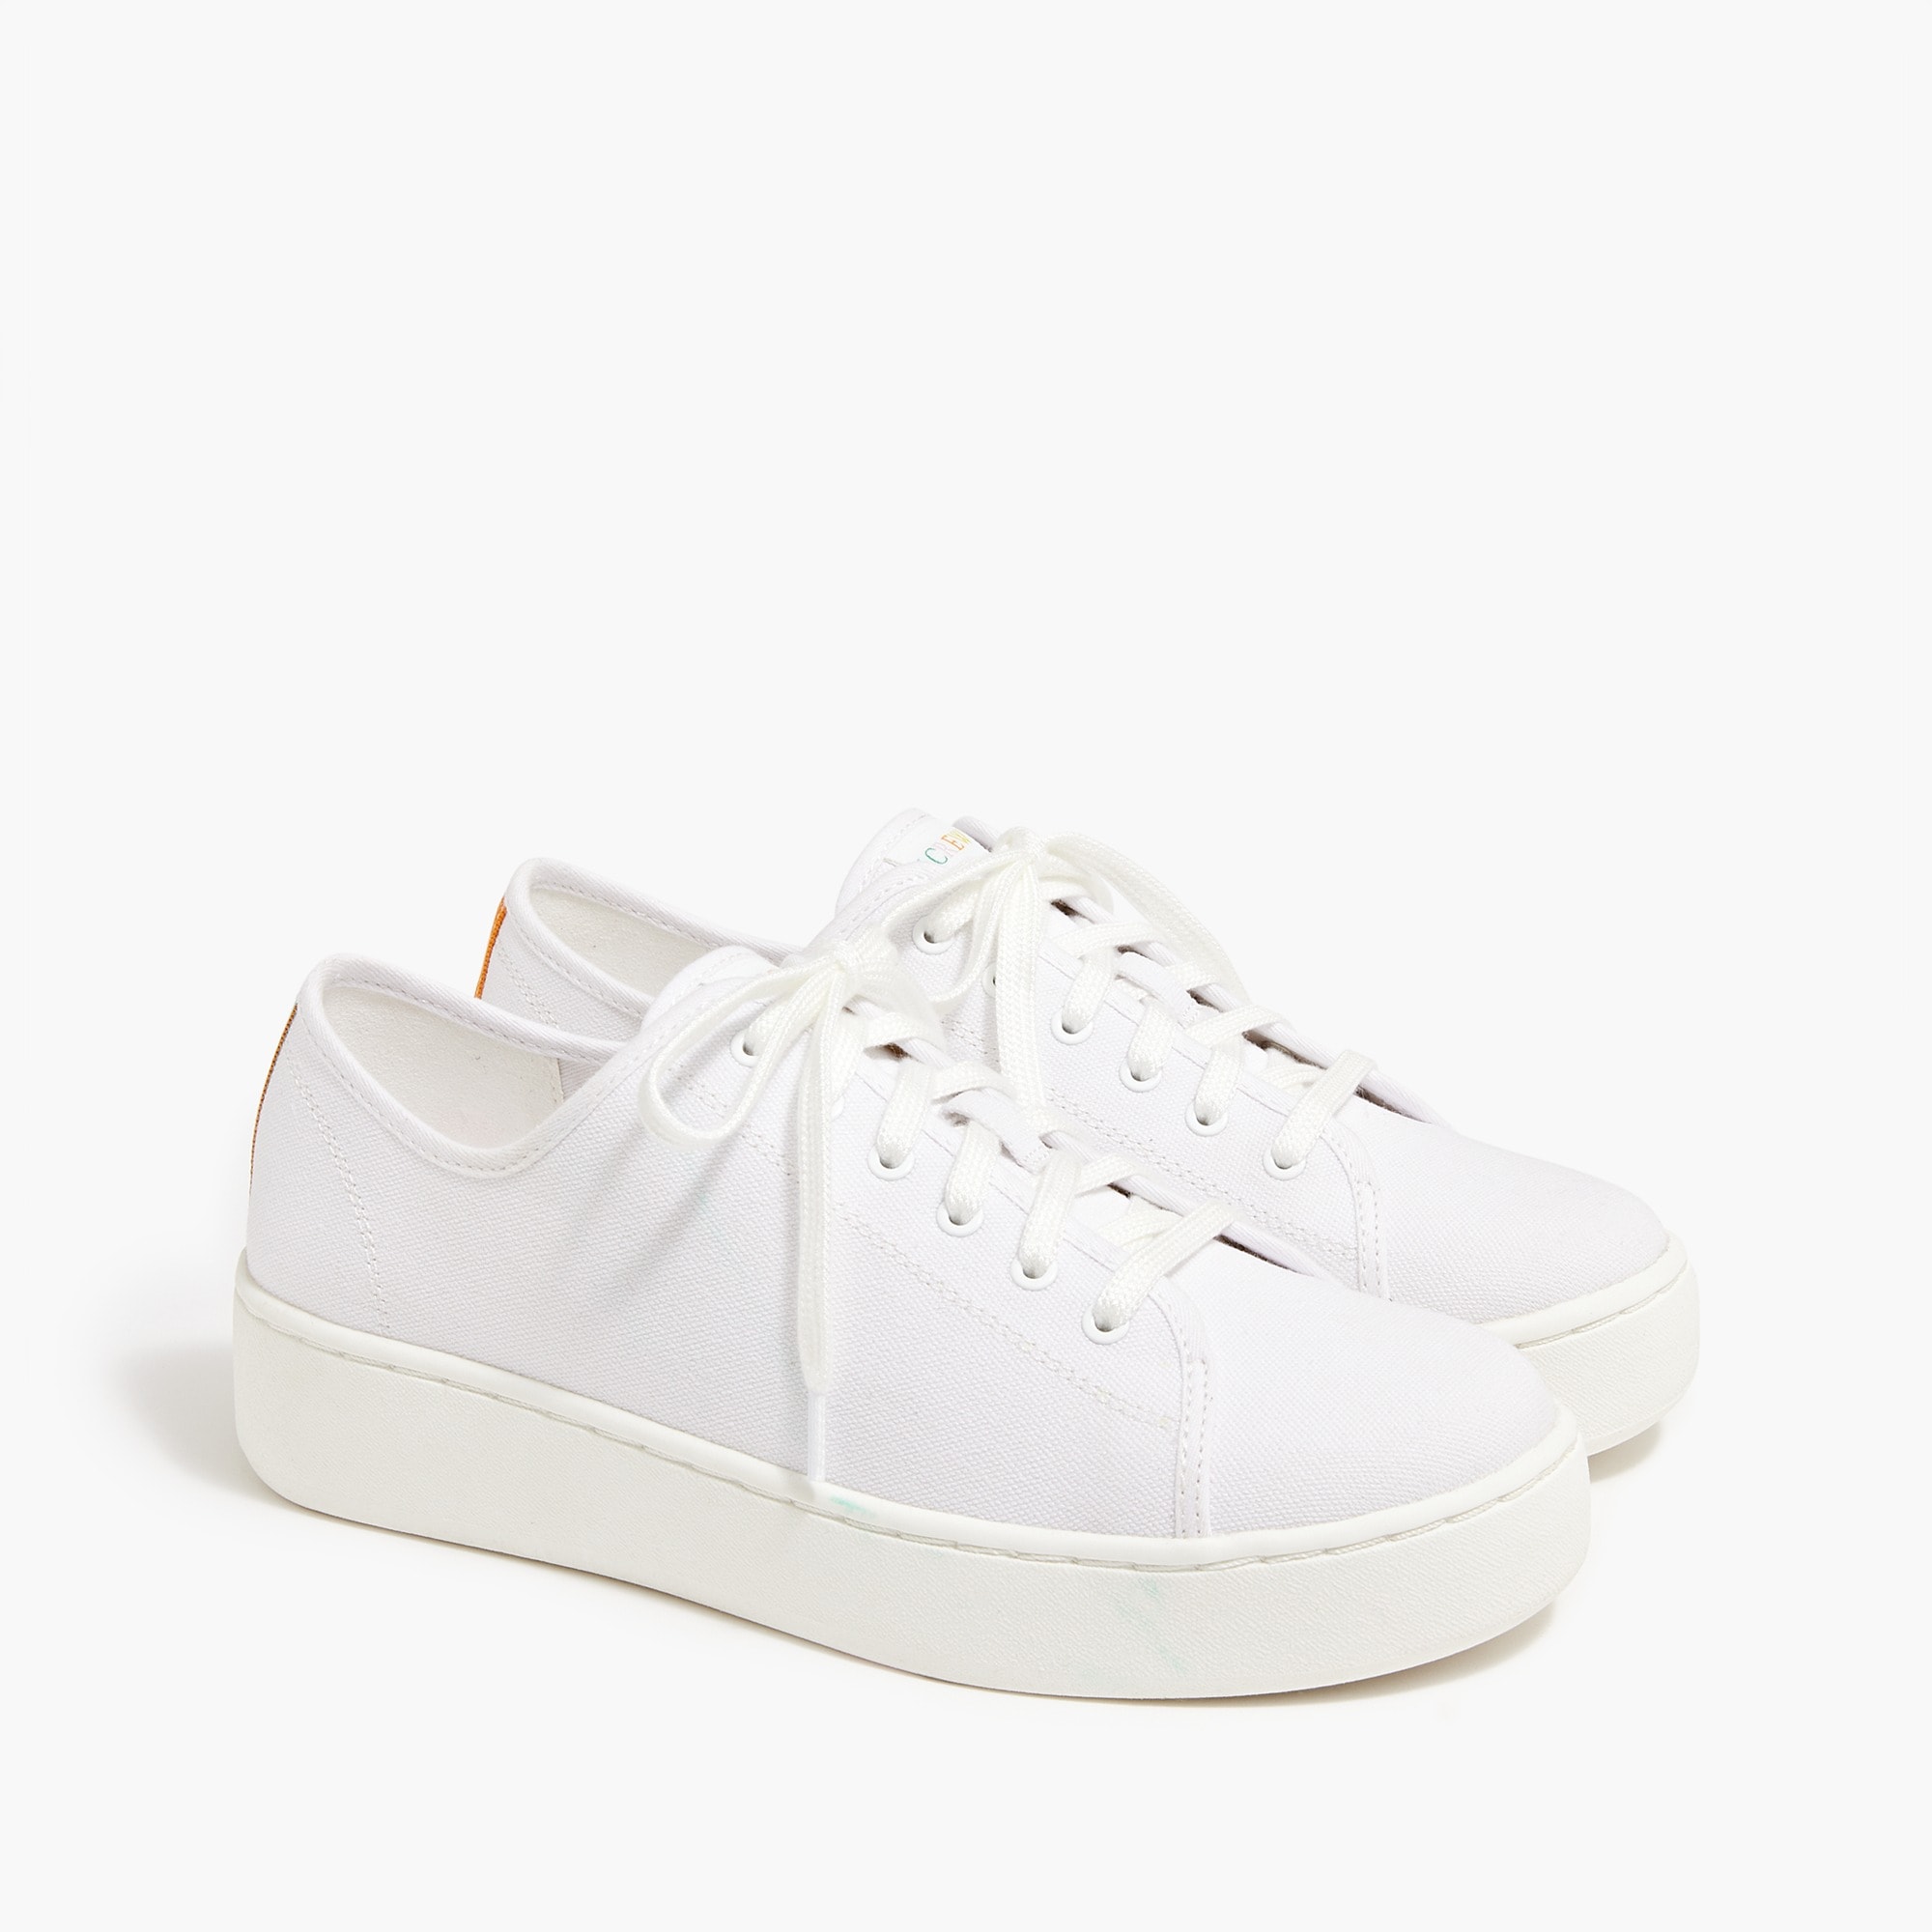 Platform sneakers with stripe